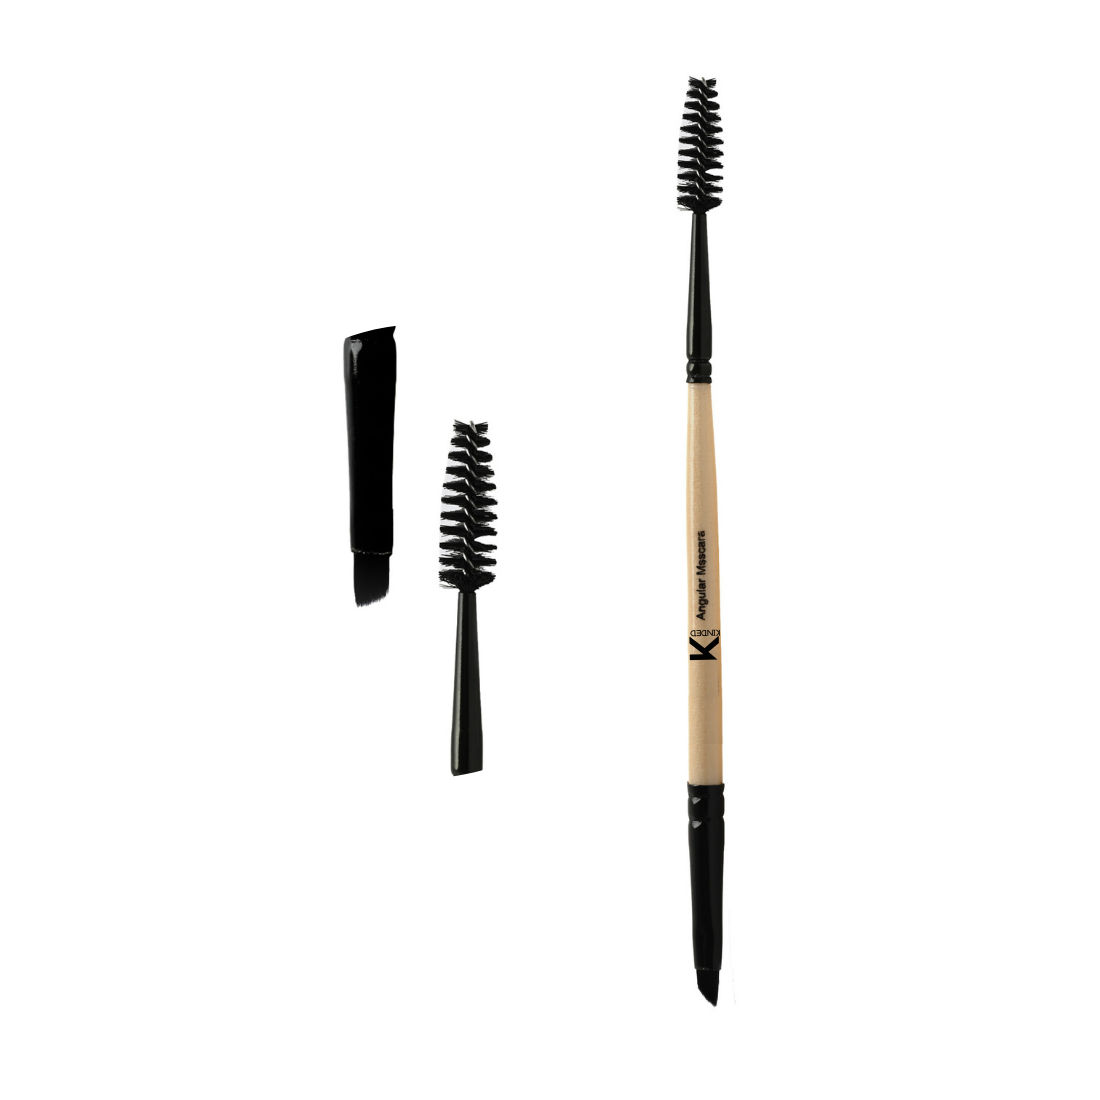 Buy KINDED Mascara Spoolie and Angular Eyebrow Double Sided 2 in 1 Makeup Brush Professional Series for Lashes Curling with Smooth Soft Synthetic Bristles Anti Rust Aluminium Ferrule Wooden Handle Grip - Purplle